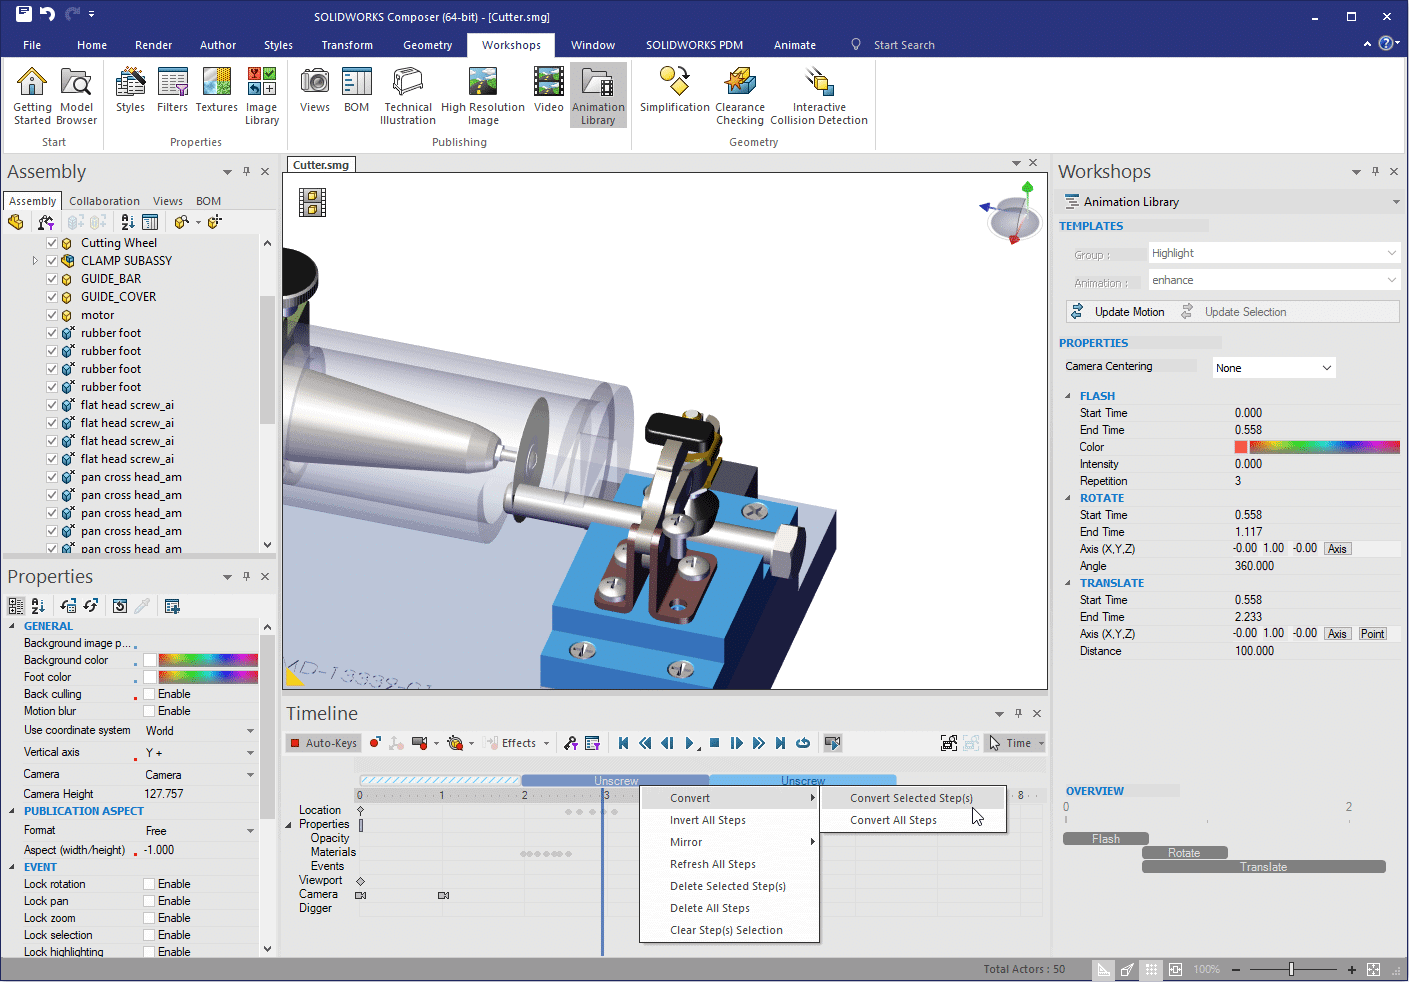 , SOLIDWORKS Composer Animation Library tips